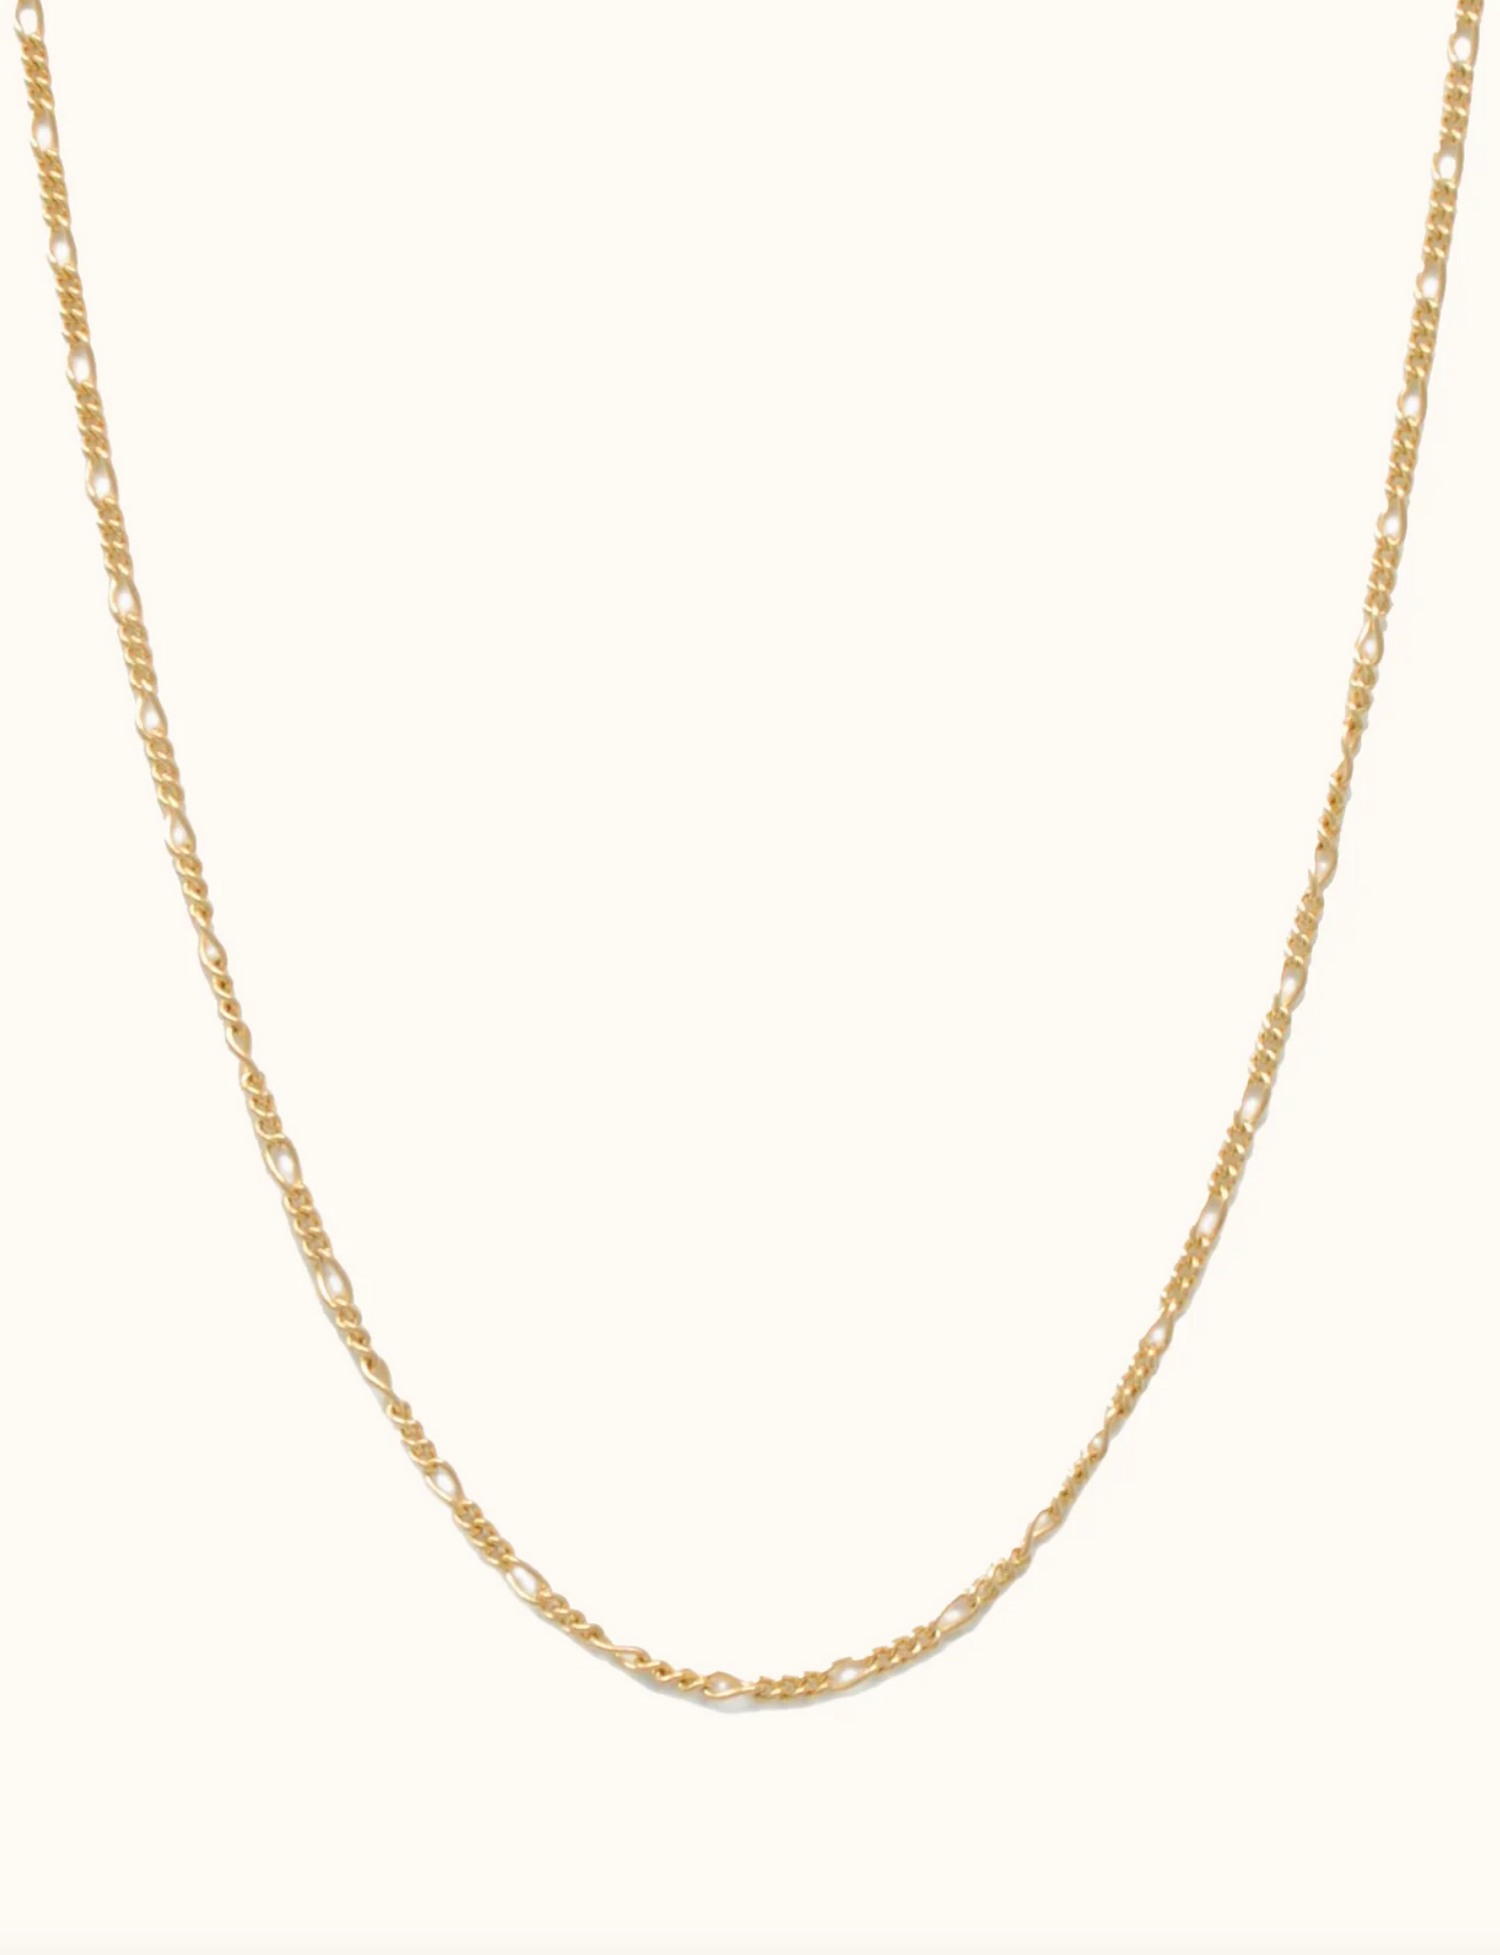 Able Figaro Chain Necklace Necklaces in  at Wrapsody